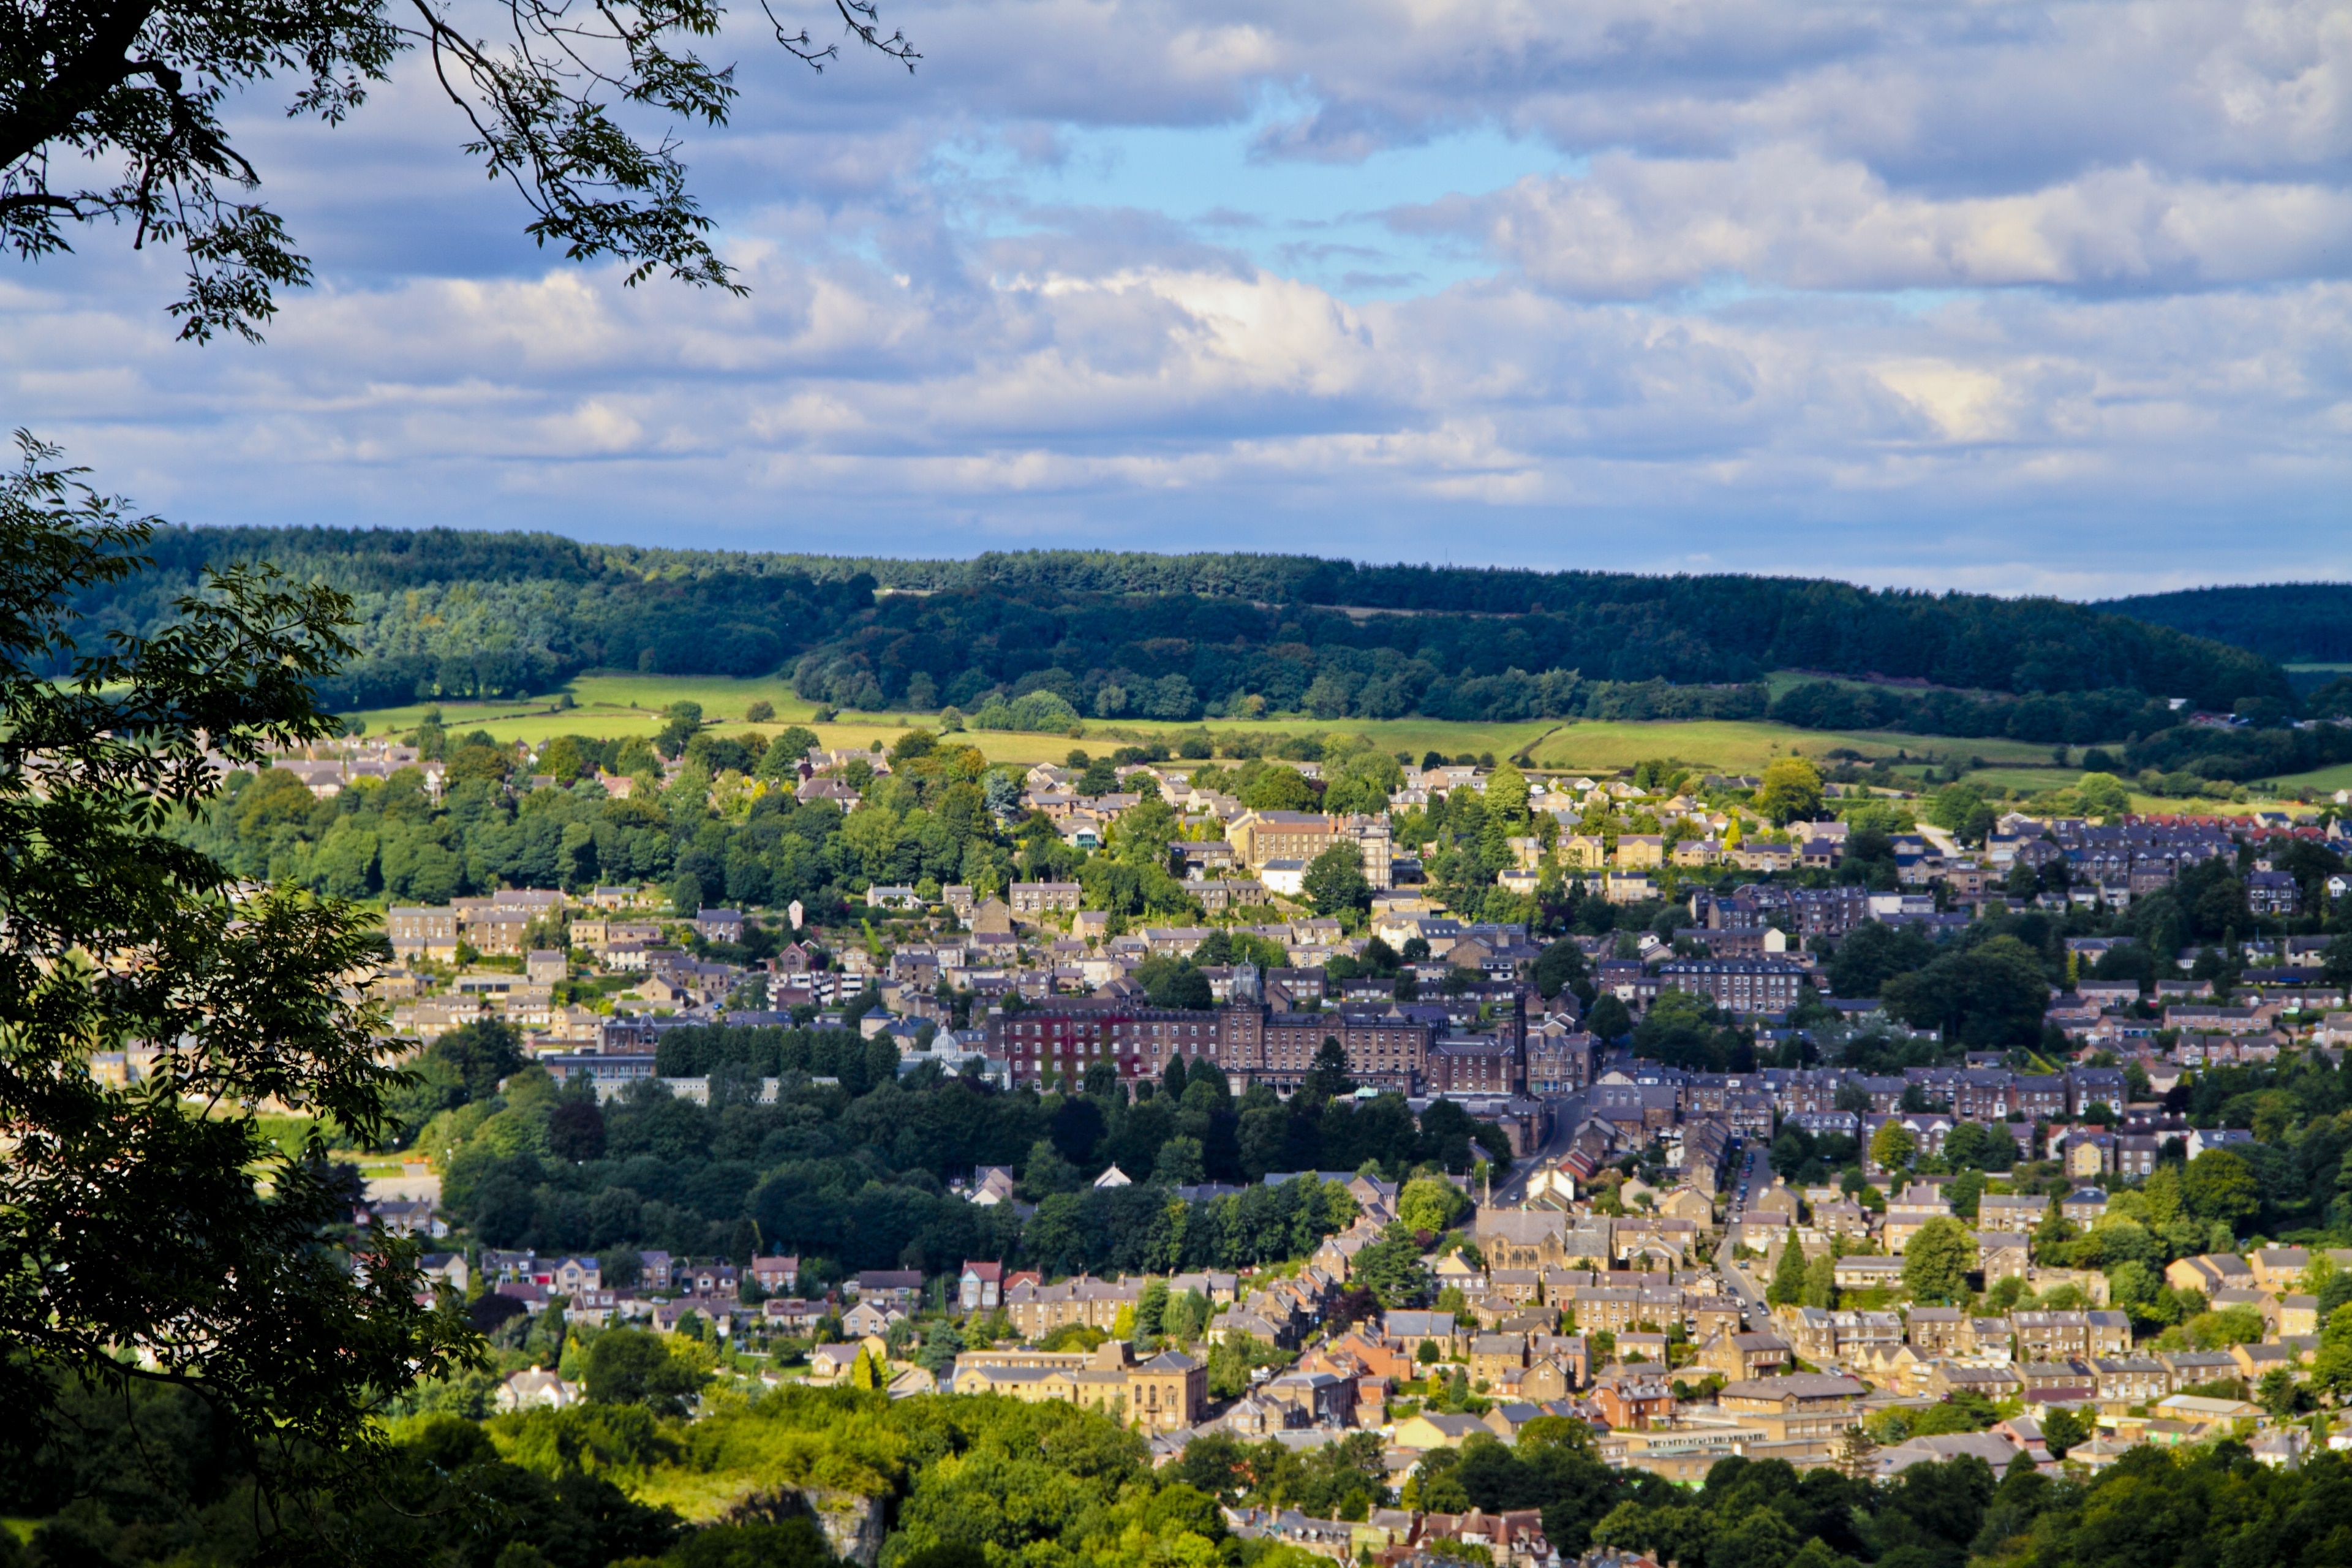 Here is a view from the top of Abraham Heights. Located in Matlock Bath, Derbyshire, England, UK. You CAN view and download the full 18megapixel image in Flickr, check out the other sizes when viewing**